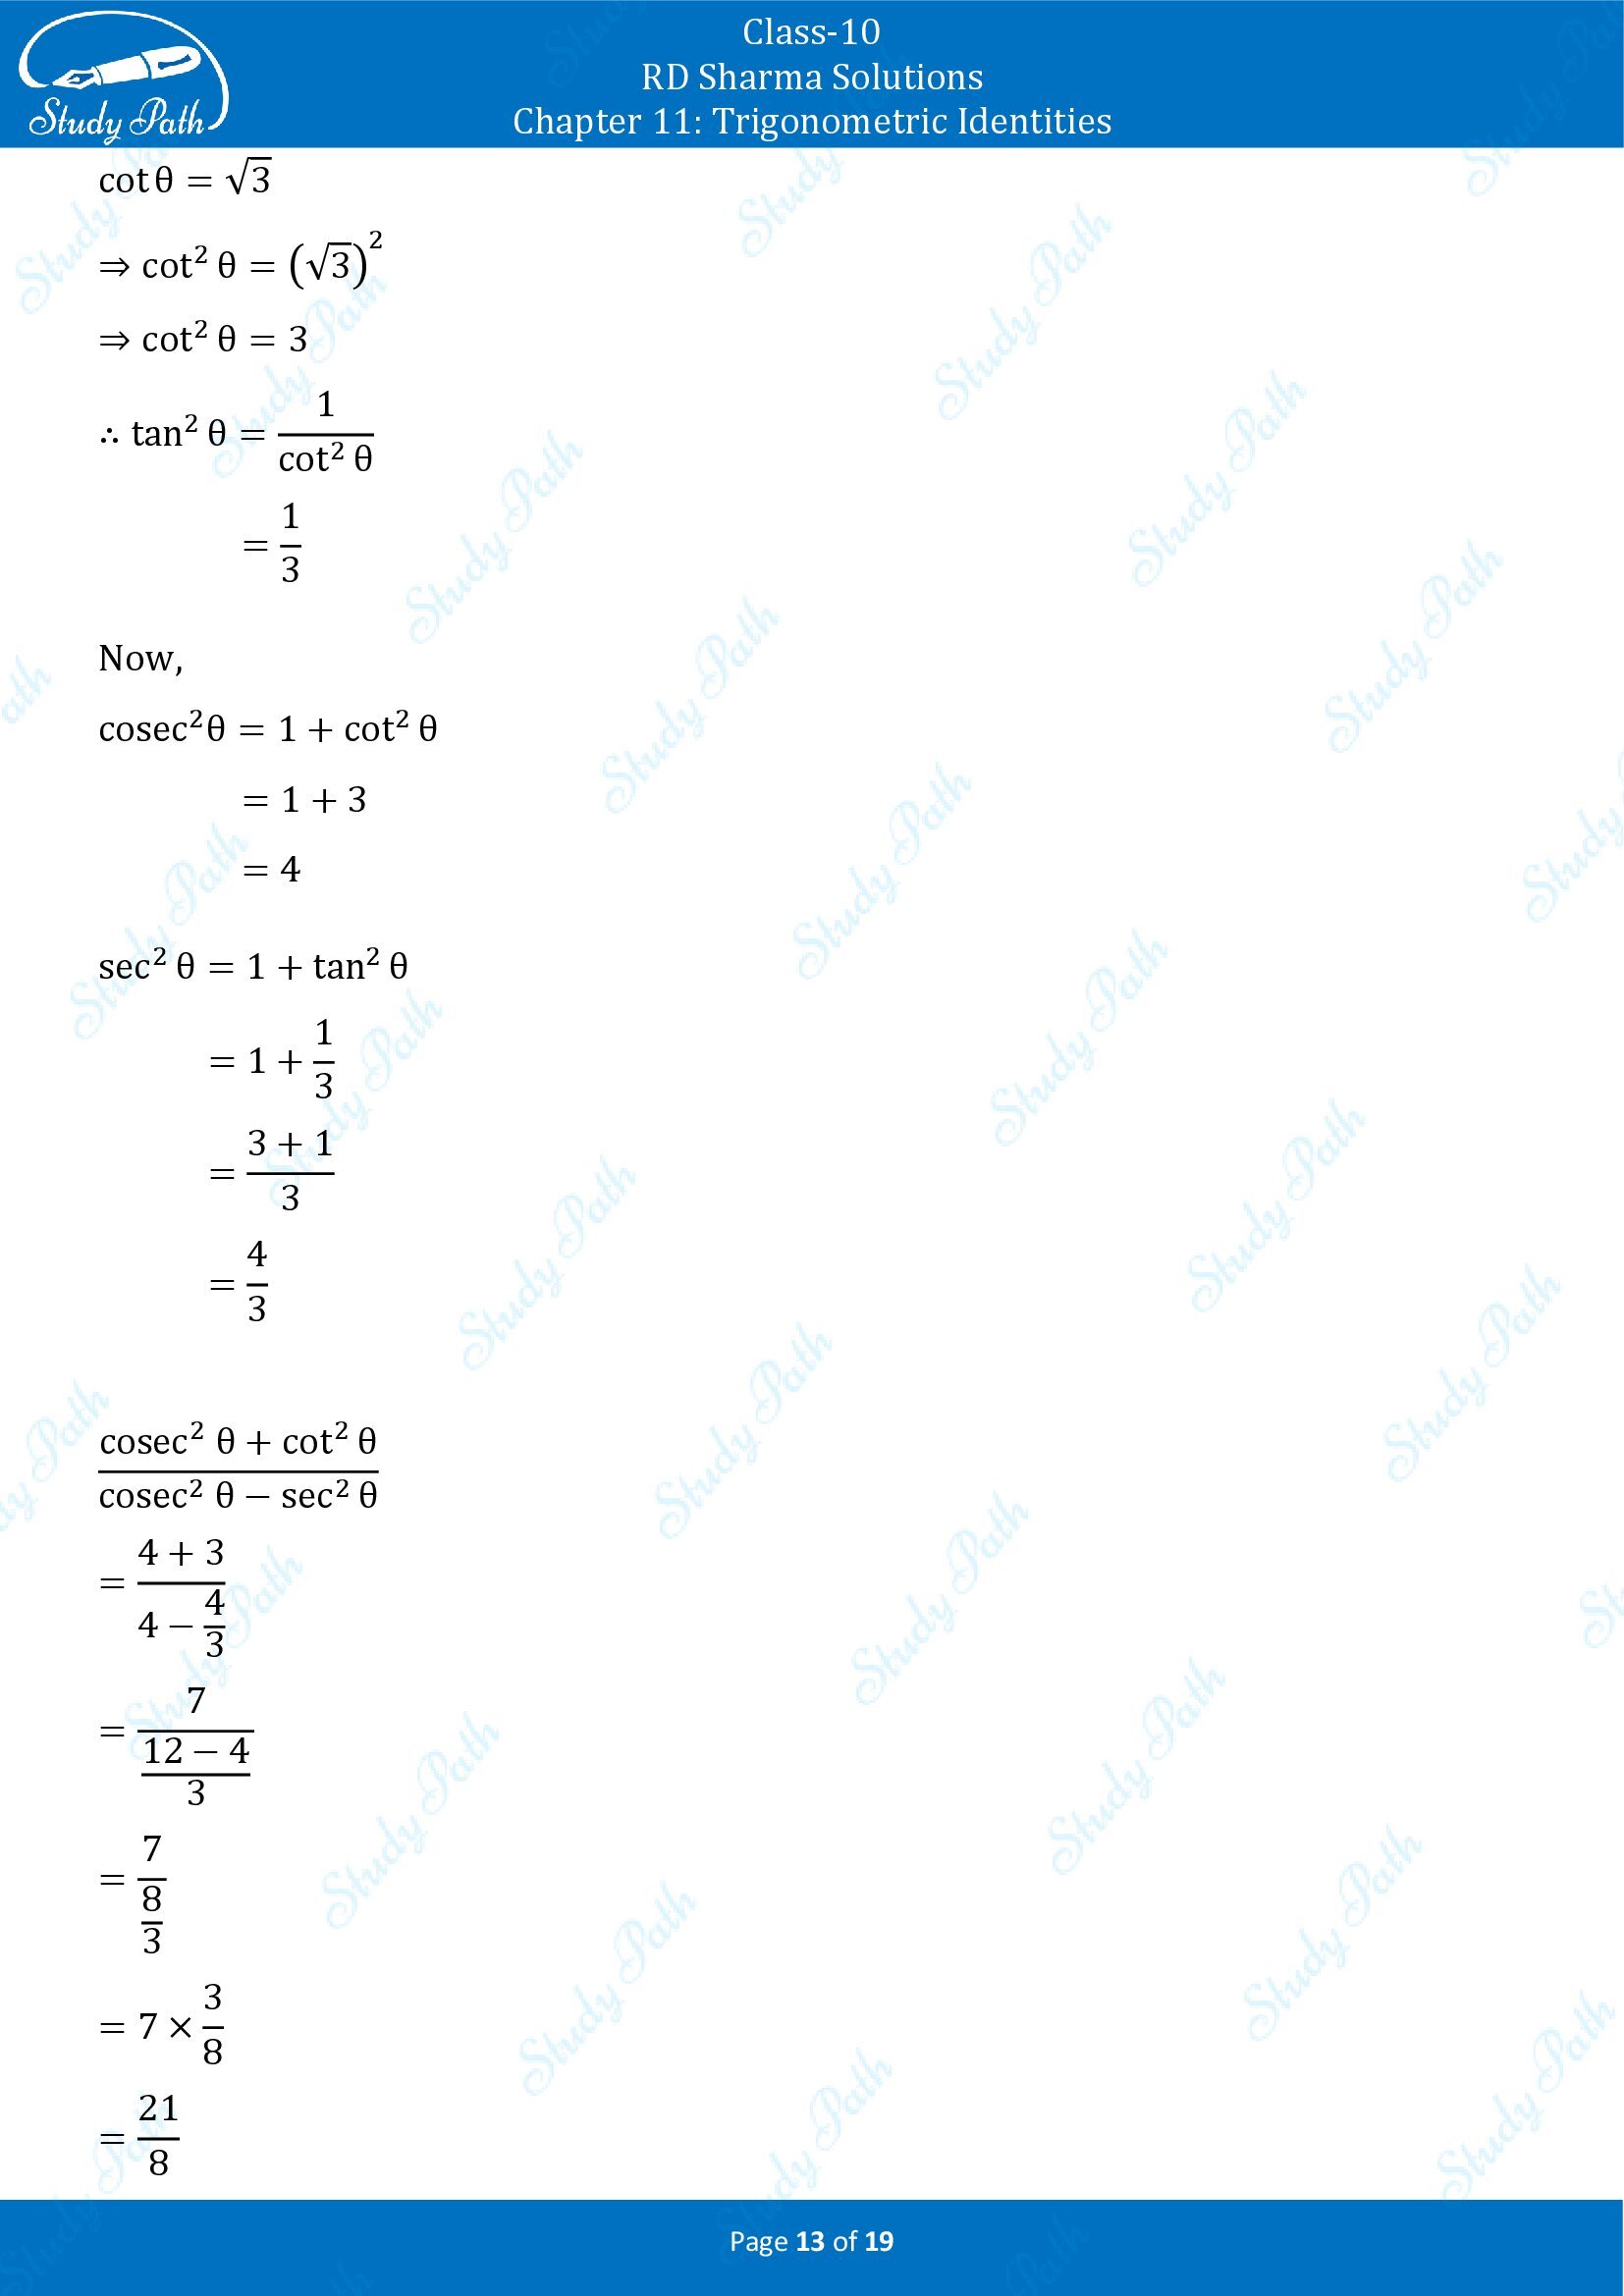 RD Sharma Solutions Class 10 Chapter 11 Trigonometric Identities Exercise 11.2 00013